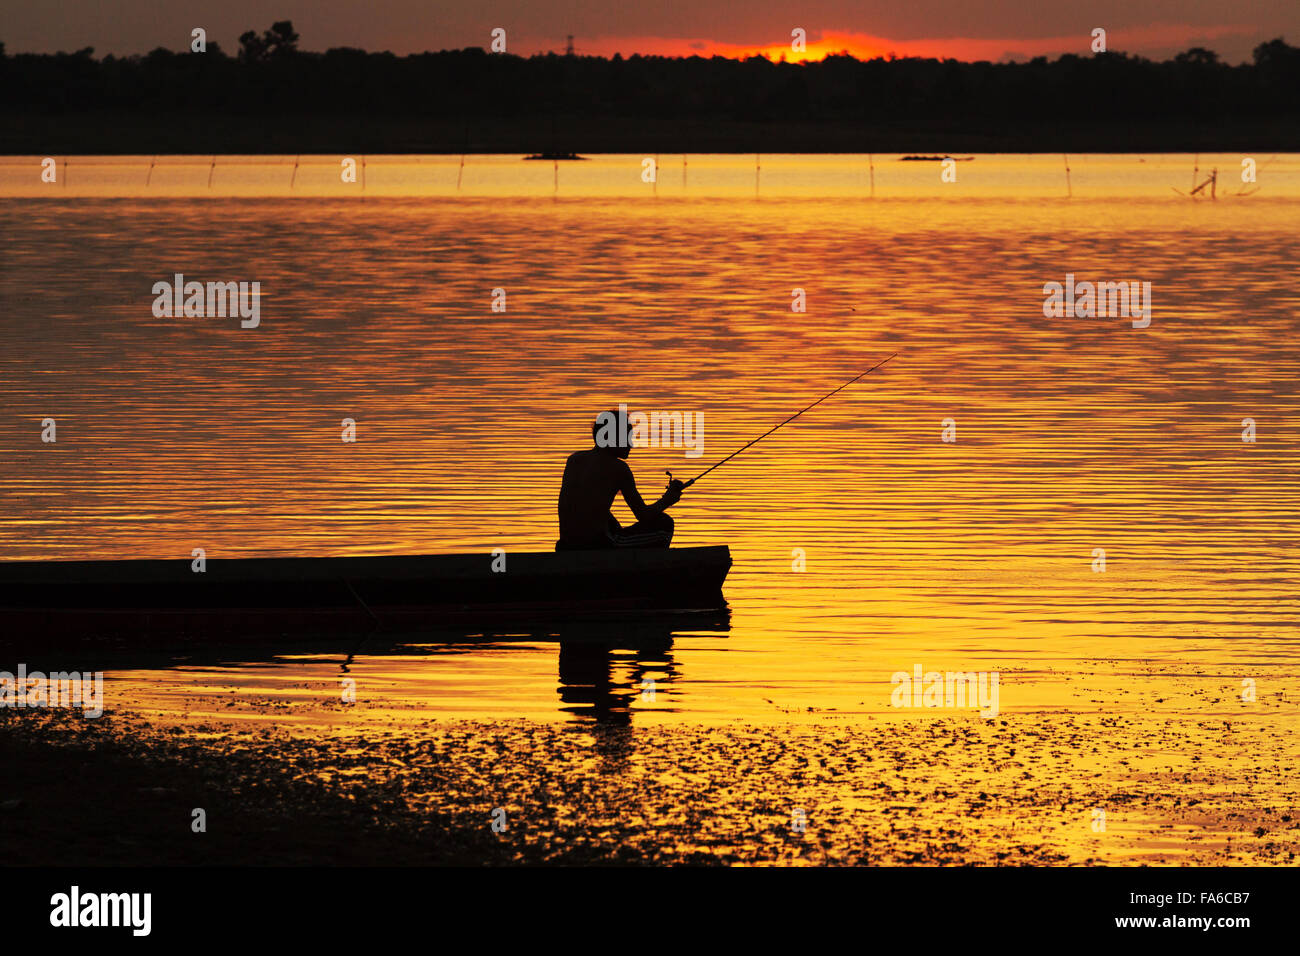 Silhouette man sitting in a boat fishing at sunset Stock Photo